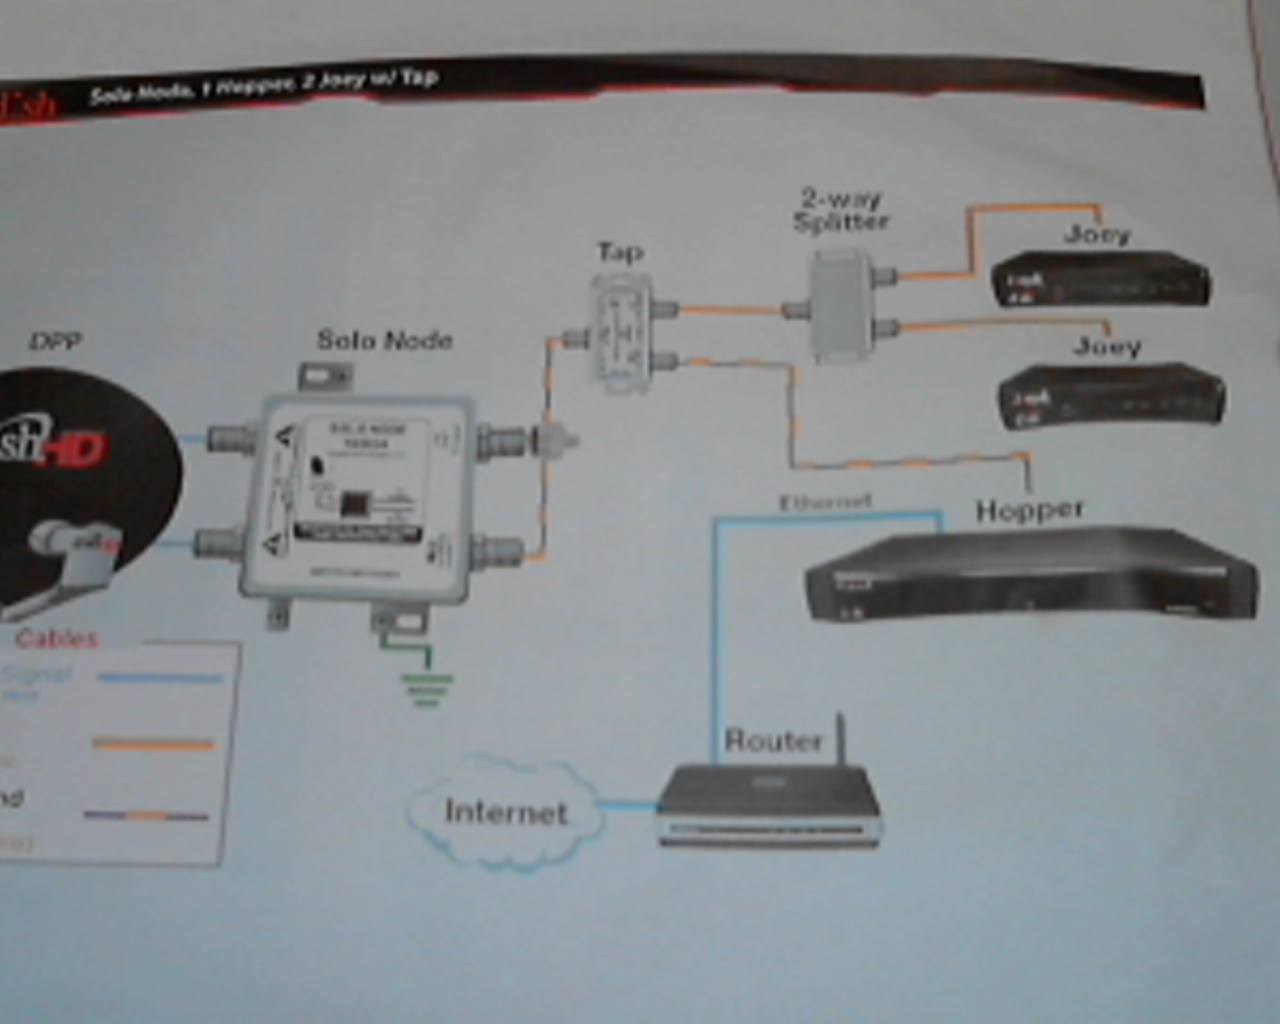 Dish Solo Node Wiring Diagram from www.satelliteguys.us